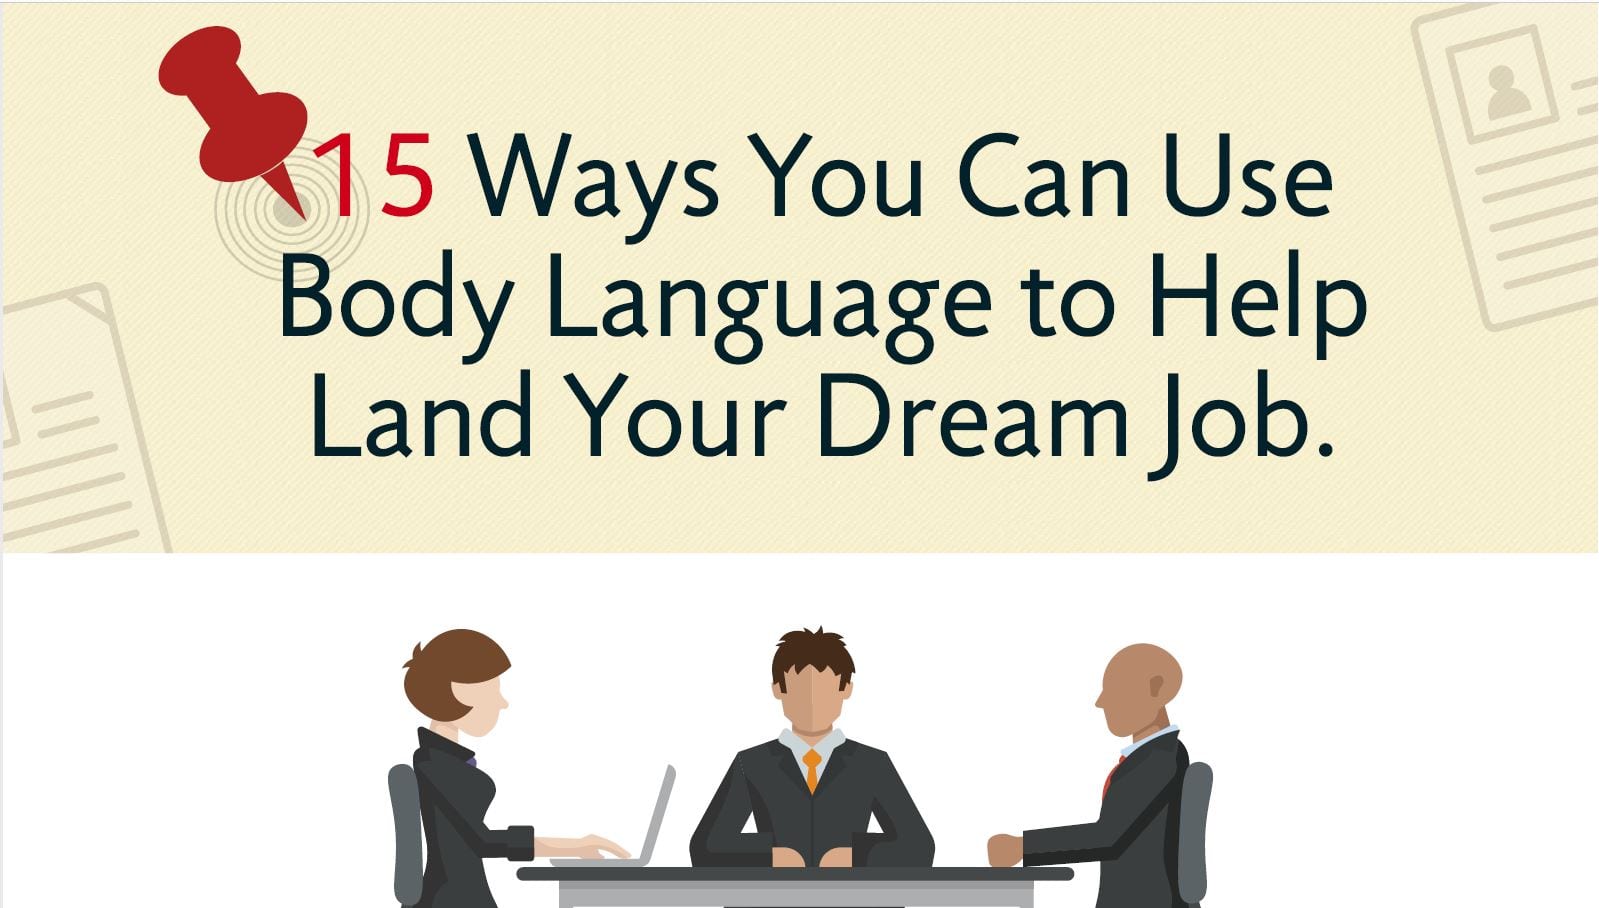 15 Ways You Can Use Body Language to Help Land Your Dream Job